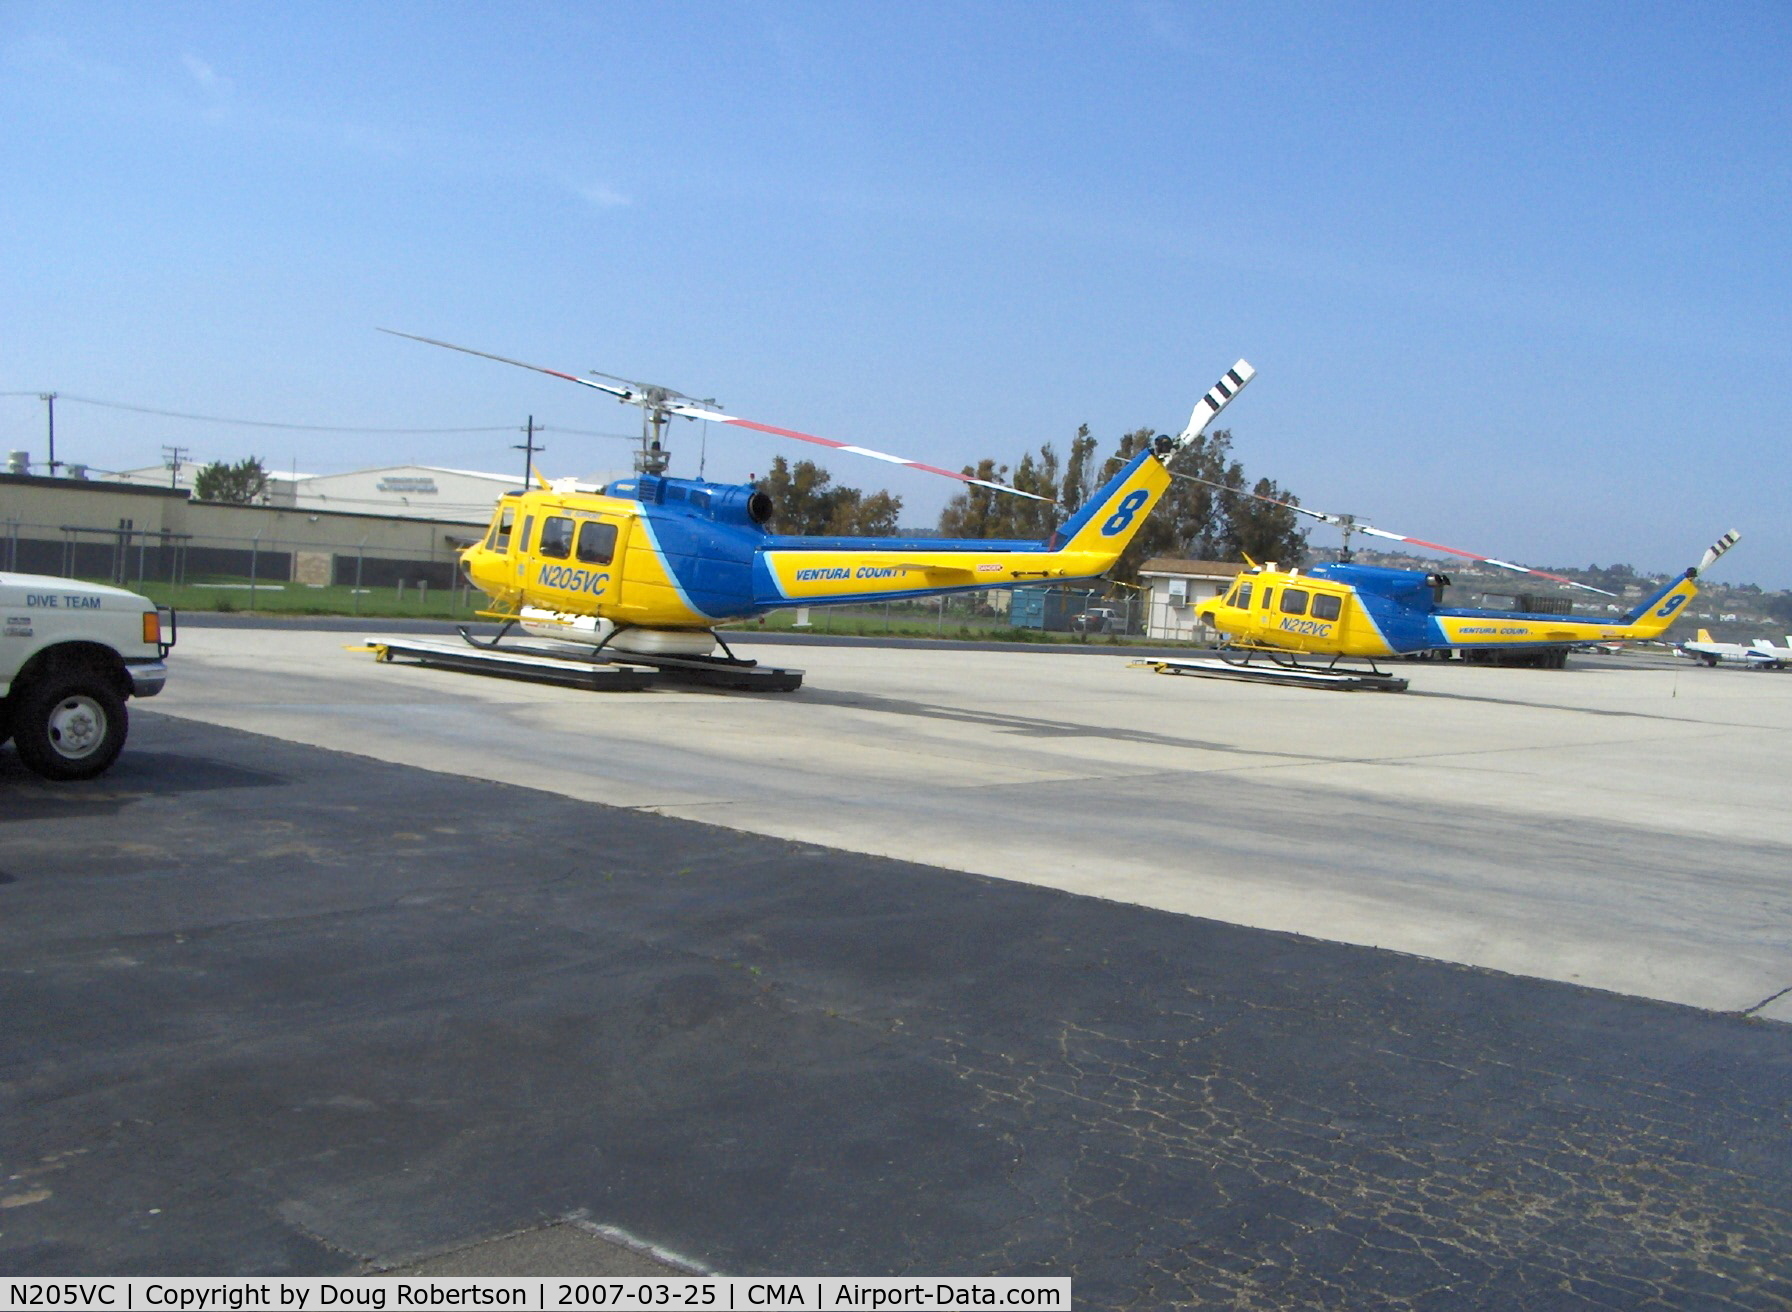 N205VC, 1969 Bell 205A-1 C/N 30066, 1969 Bell 205A-1, one 1,400 shp AVCO Lycoming T5313A turboshaft derated to 1,250 shp for takeoff, Ventura County Sheriff's Department #8, with N212VC in right background